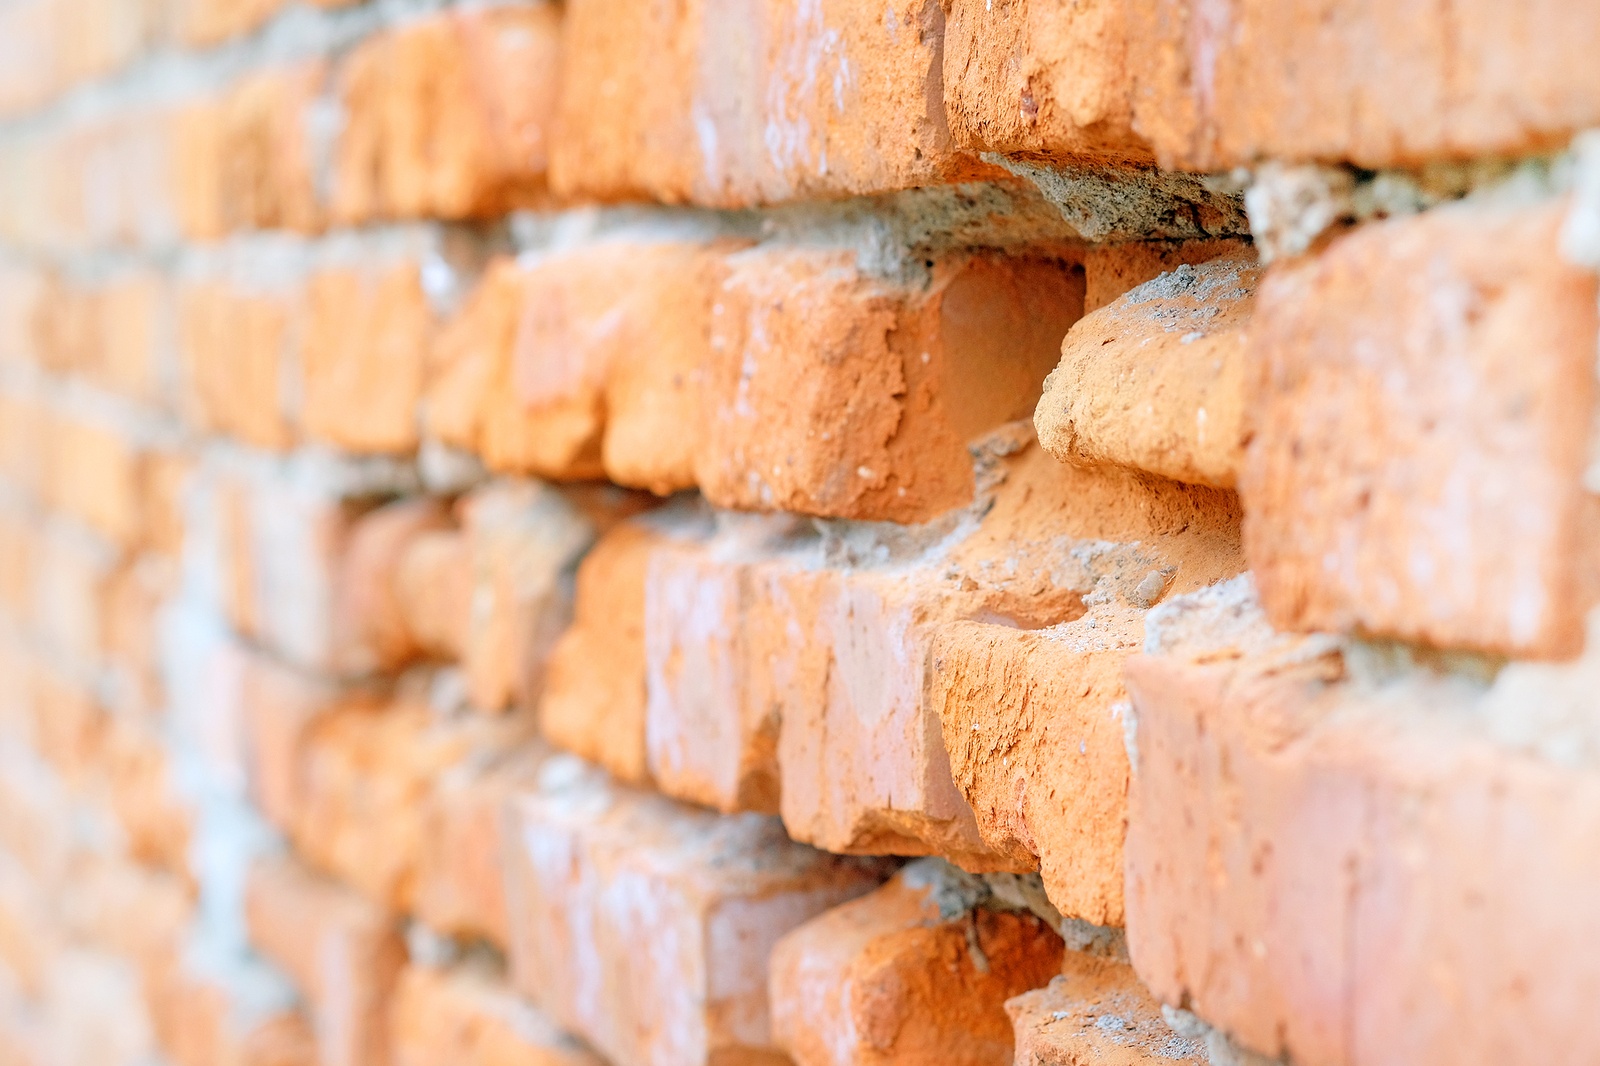 How Does Water Damage Cause Spalling Brick?